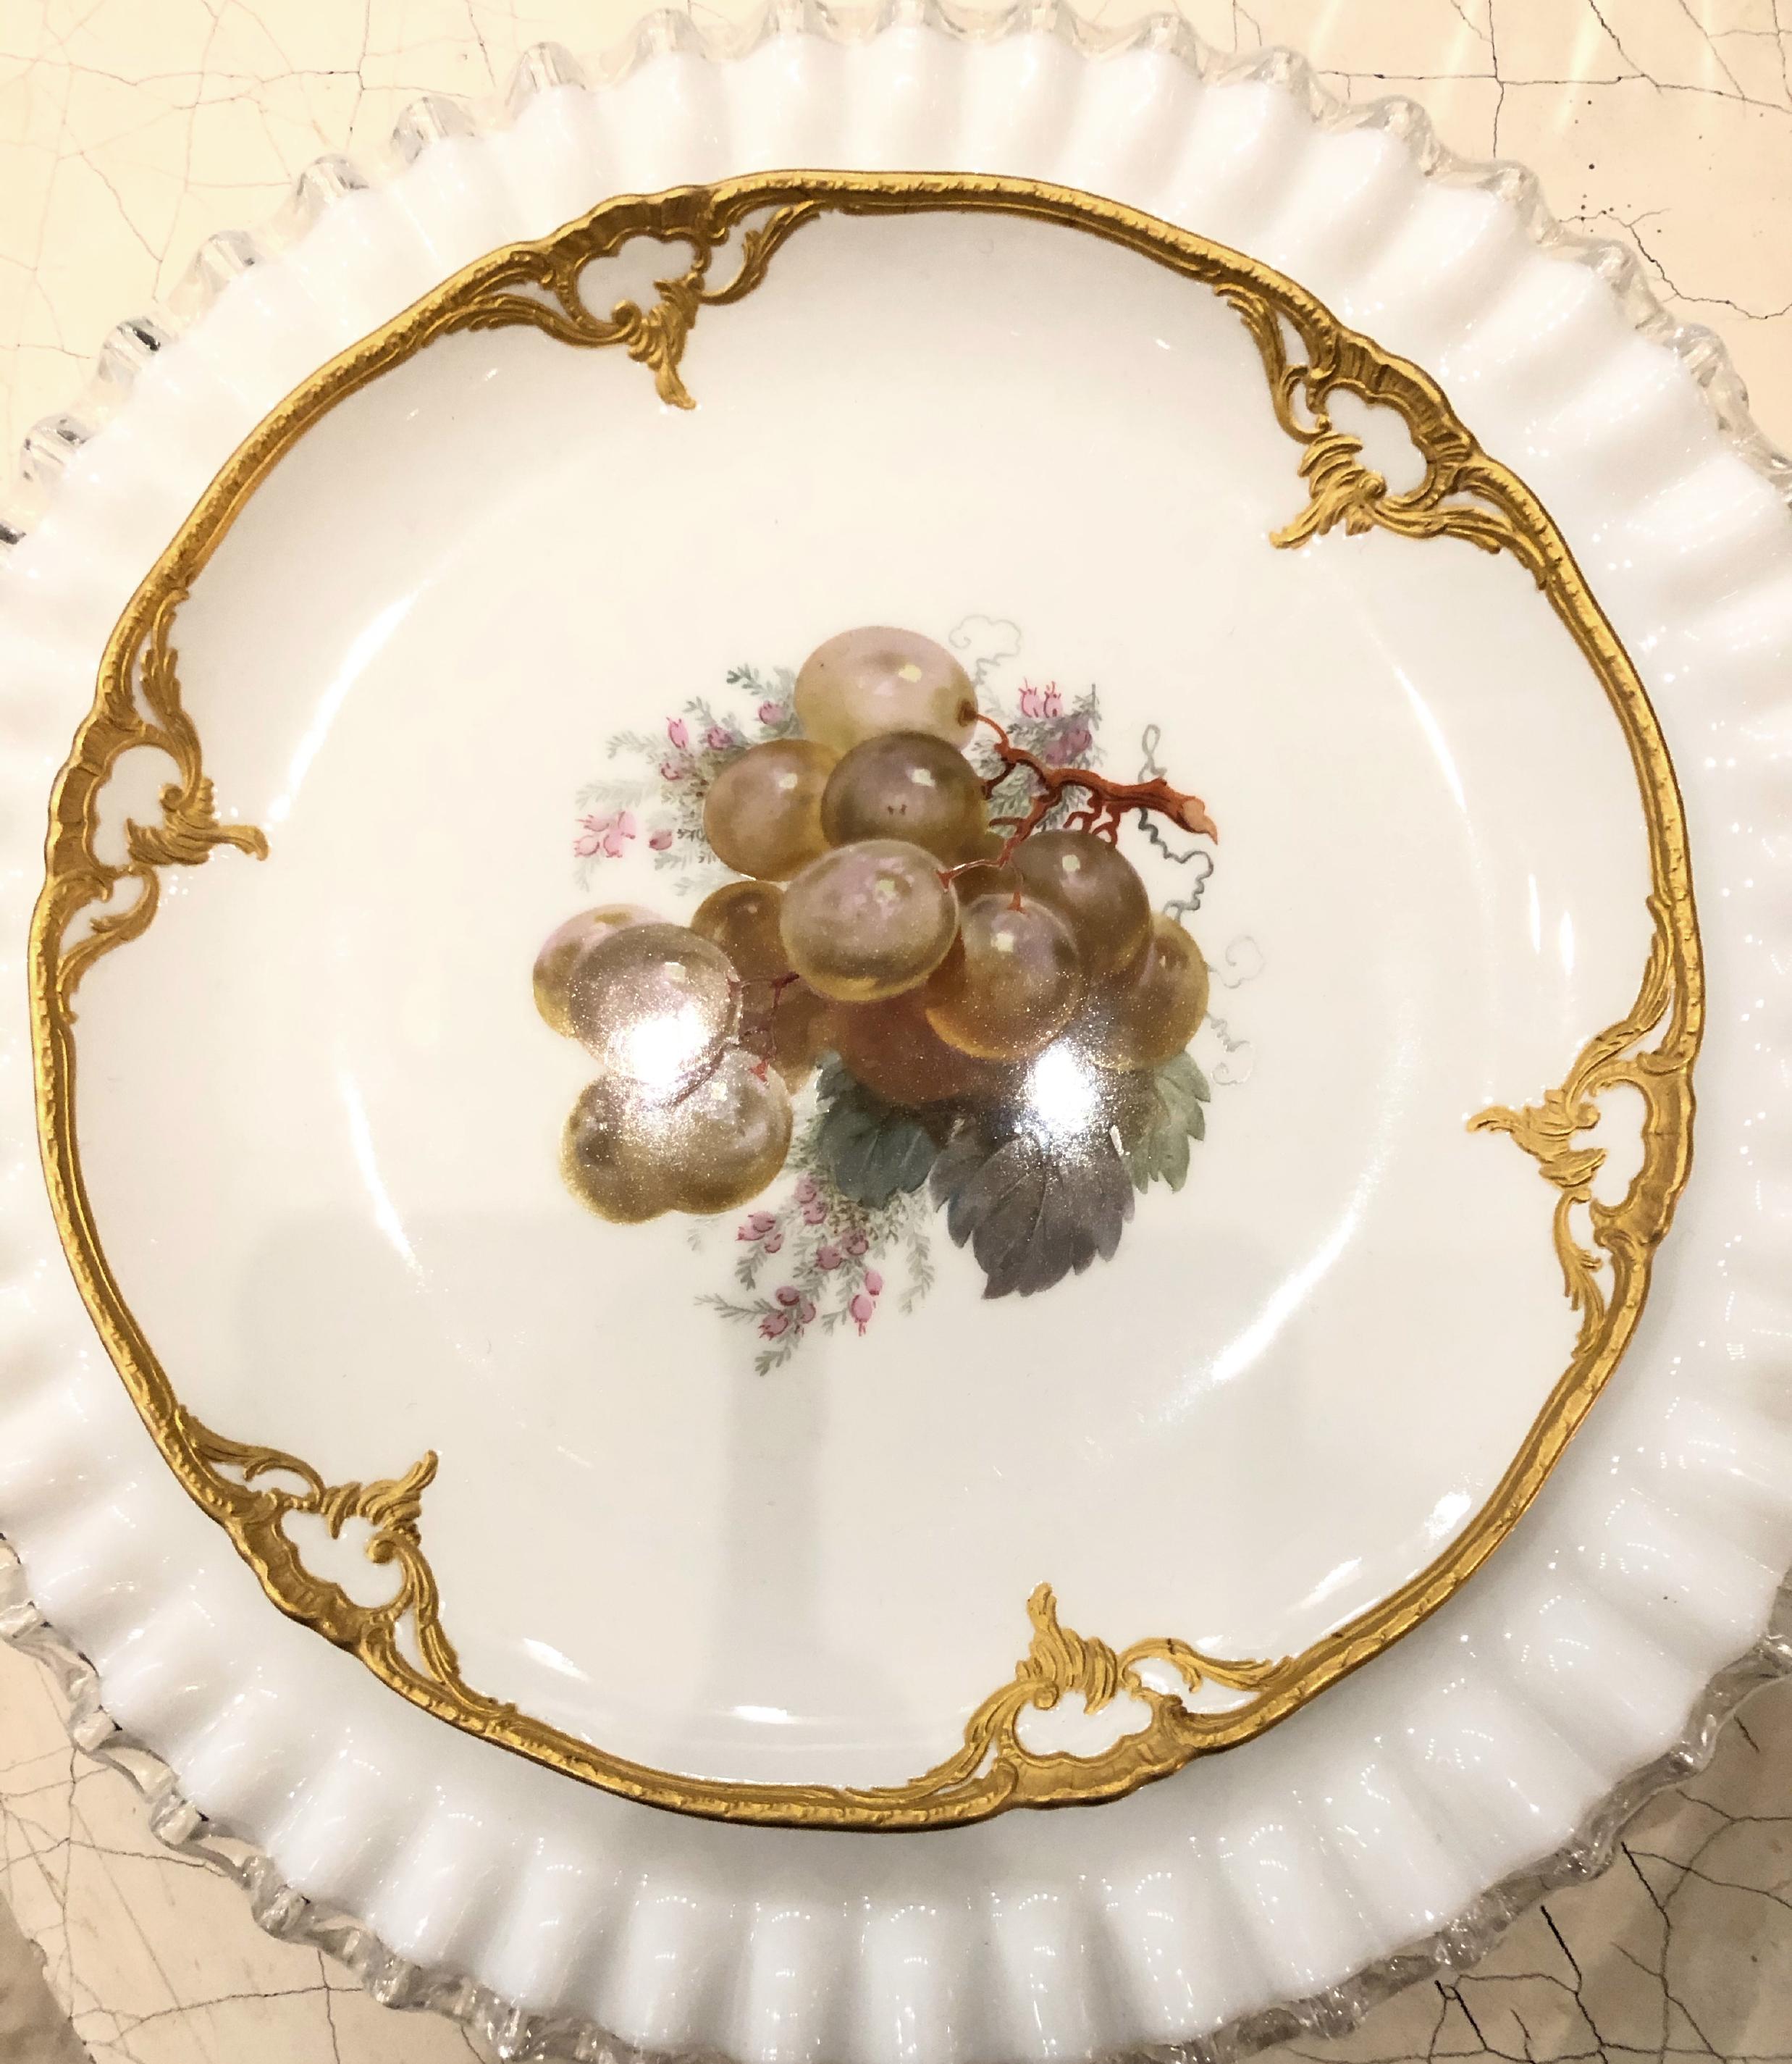 20th Century Set of Eight Porcelain Dessert Plates Depicting Fruit with 14k Gold Detail